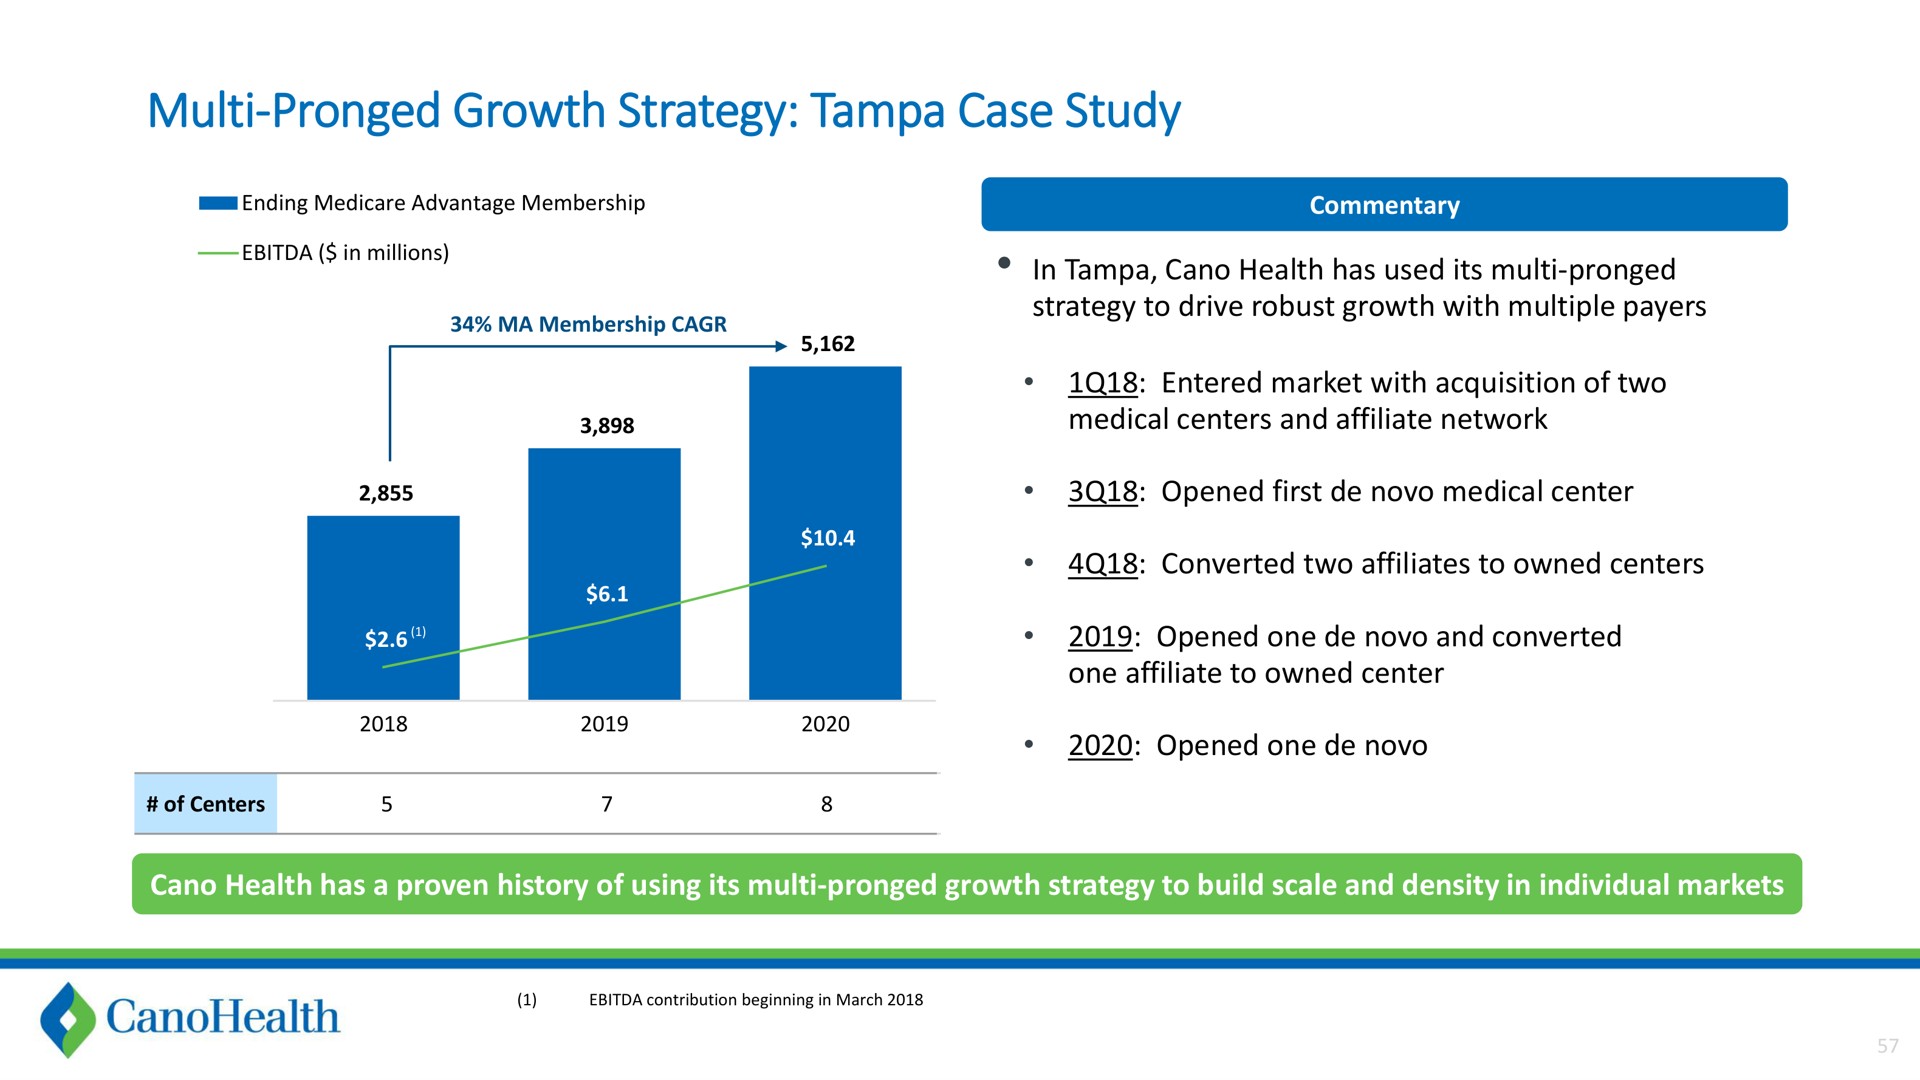 pronged growth strategy case study | Cano Health